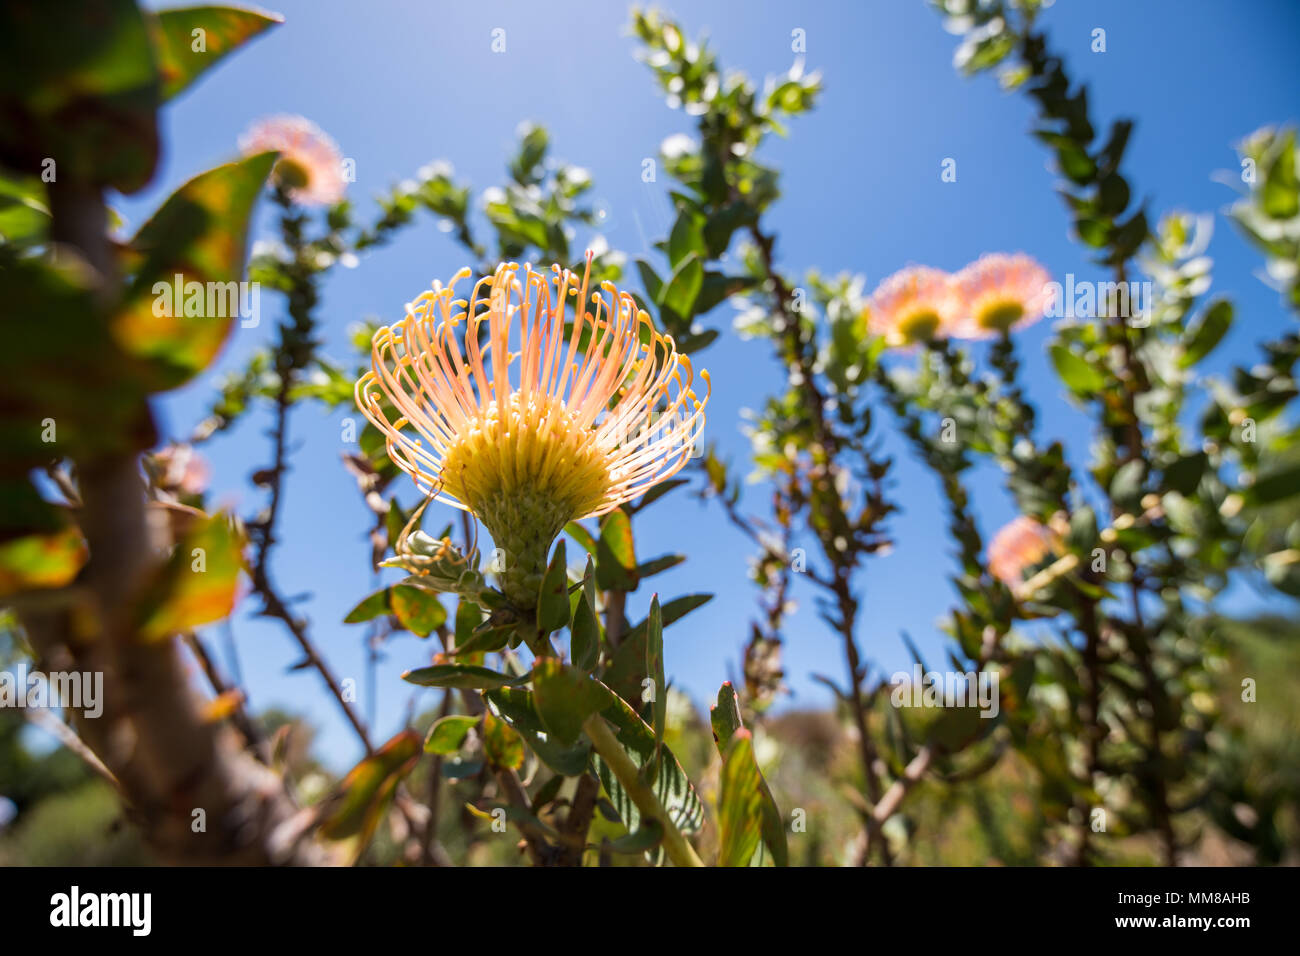 Pincushion protea bush at the Kirstenbosch Botanical Gardens in Cape Town, South Africa Stock Photo